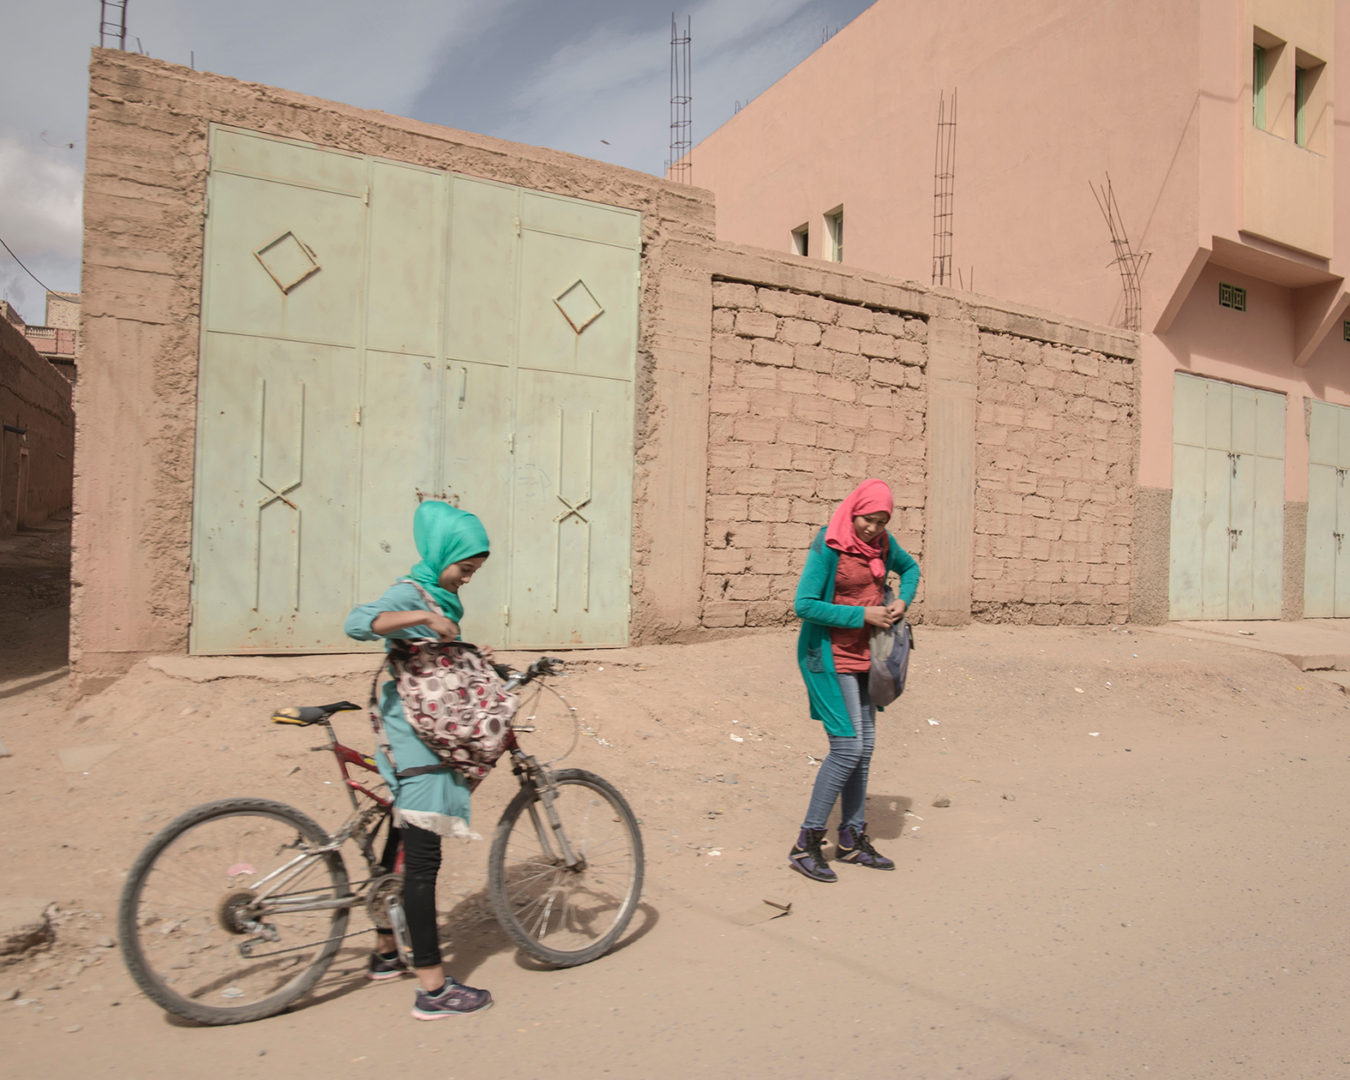 Two women in Rissani, Morocco